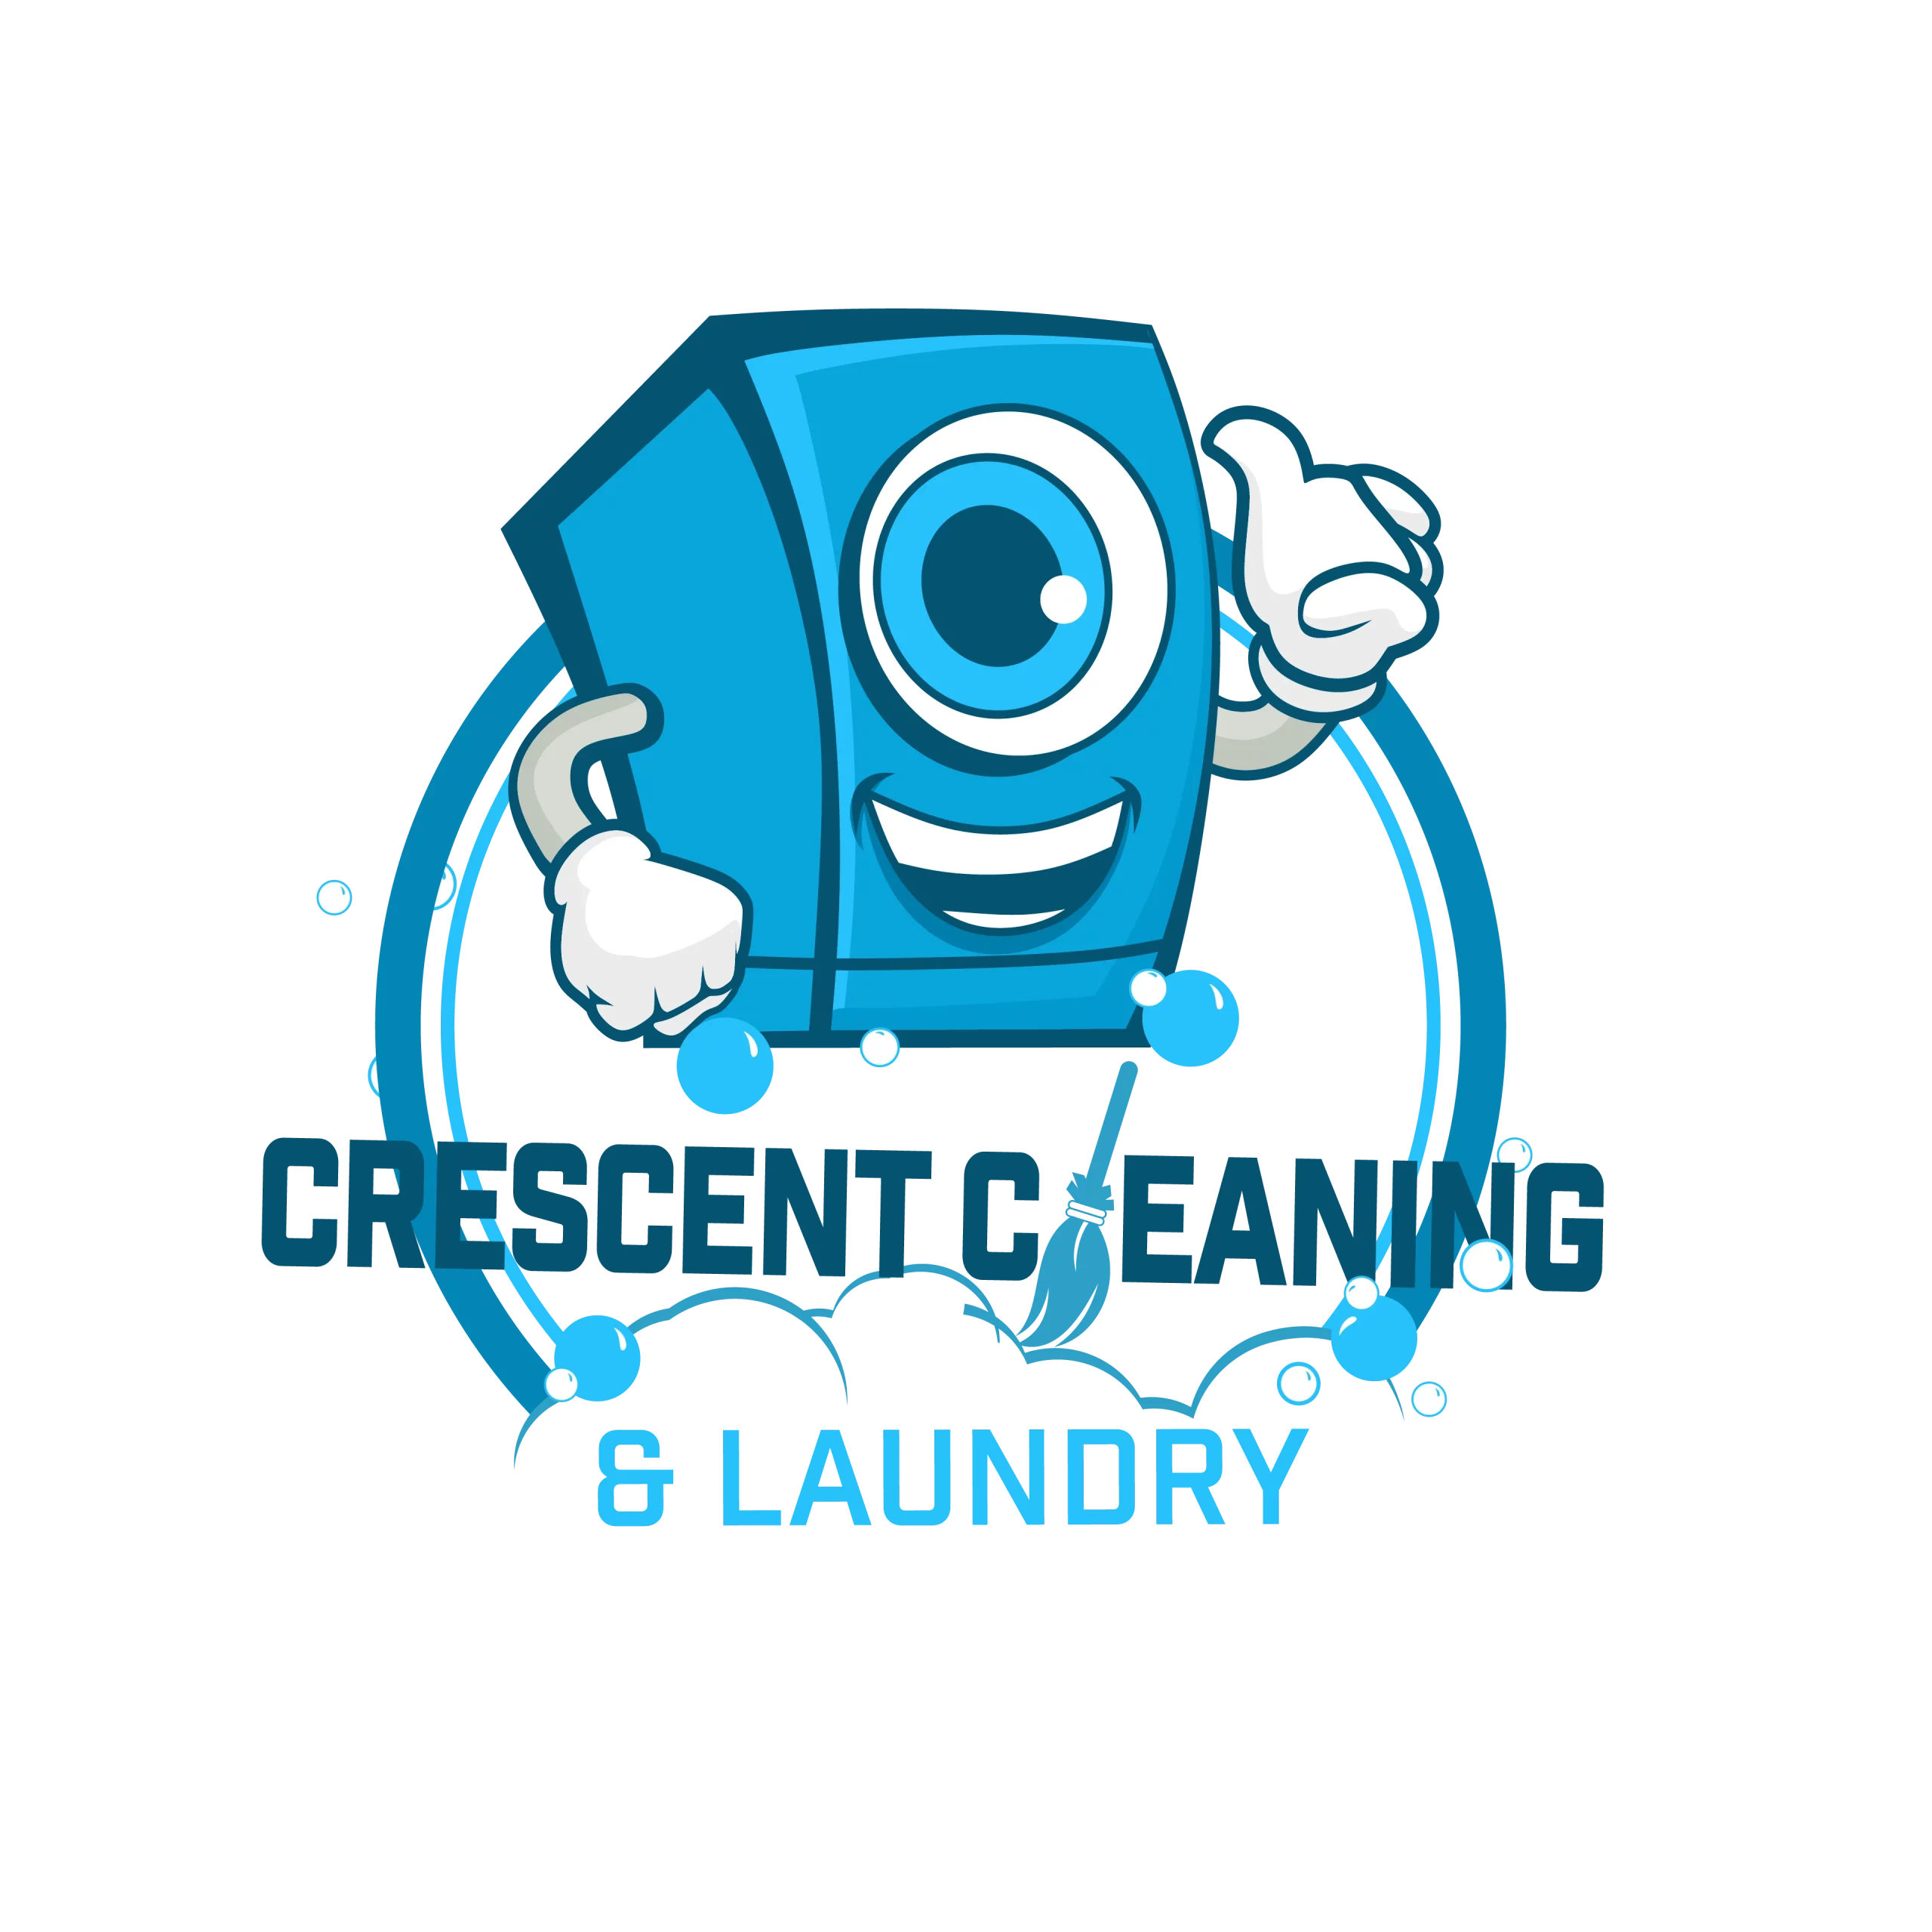 Crescent-Cleaning-and-Laundry-logo-new-scaled.webp